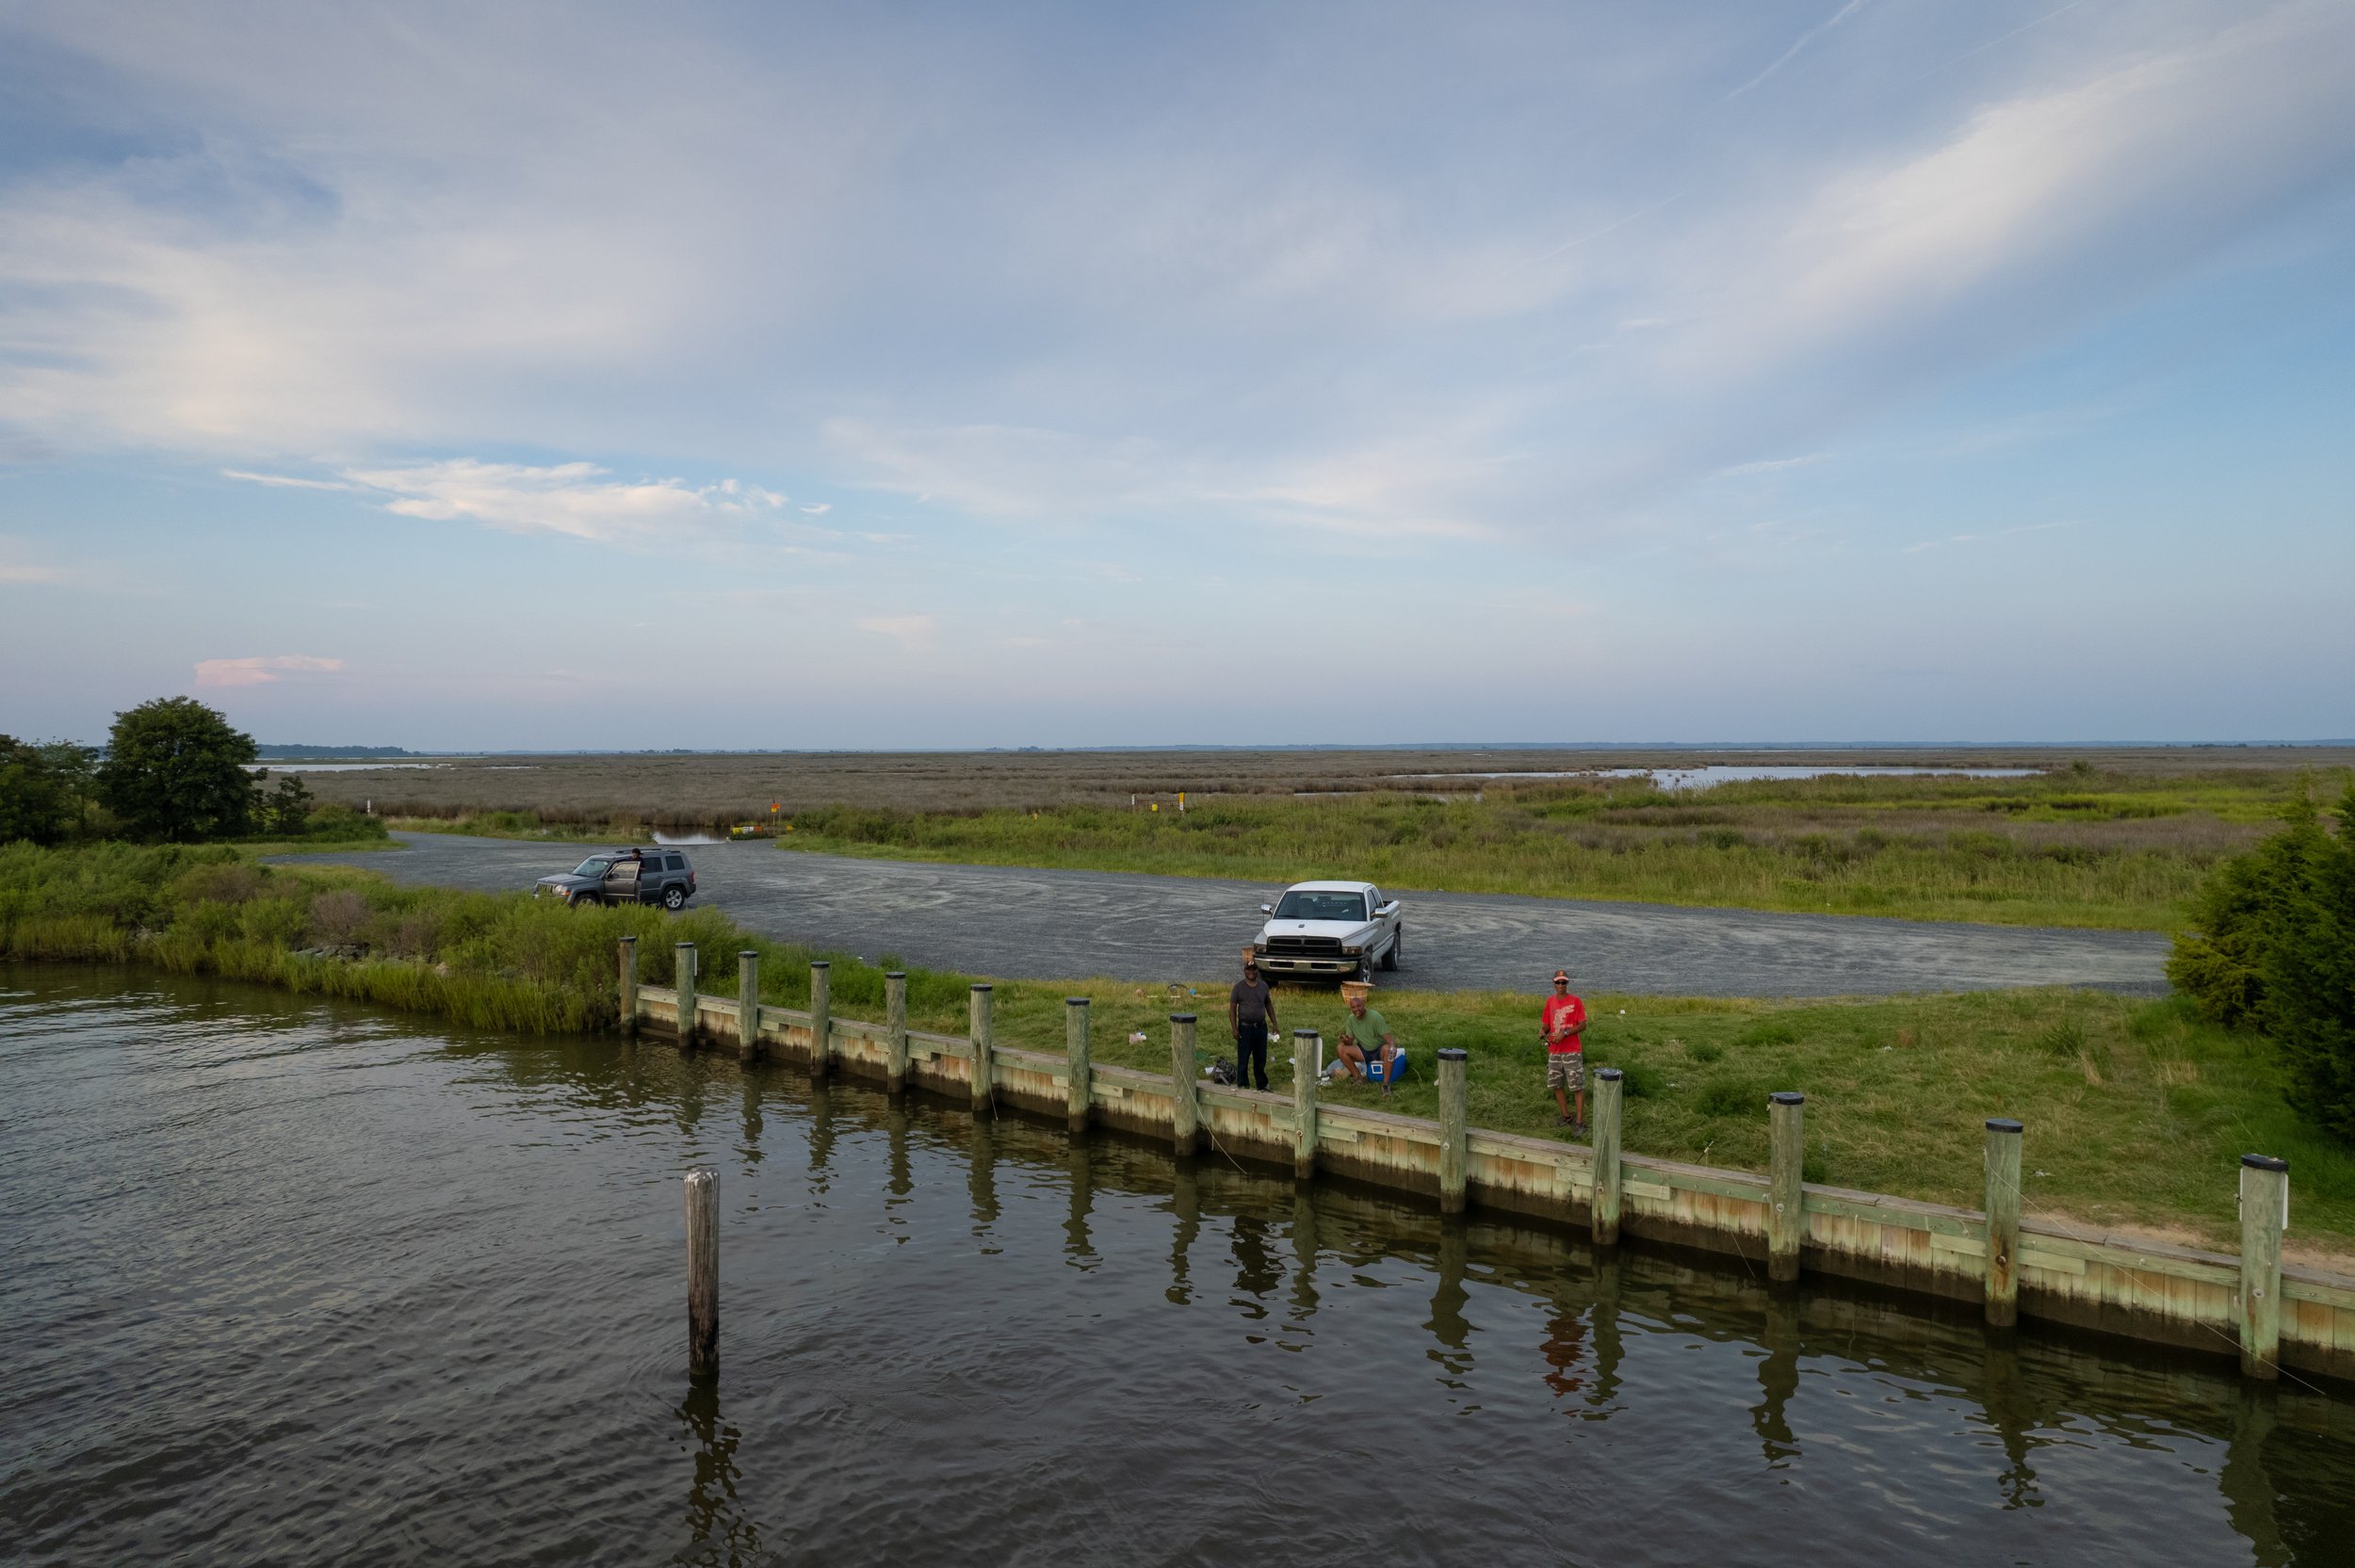 Men enjoy fishing at the end of Riley Roberts RD, Dorchester County, Maryland.